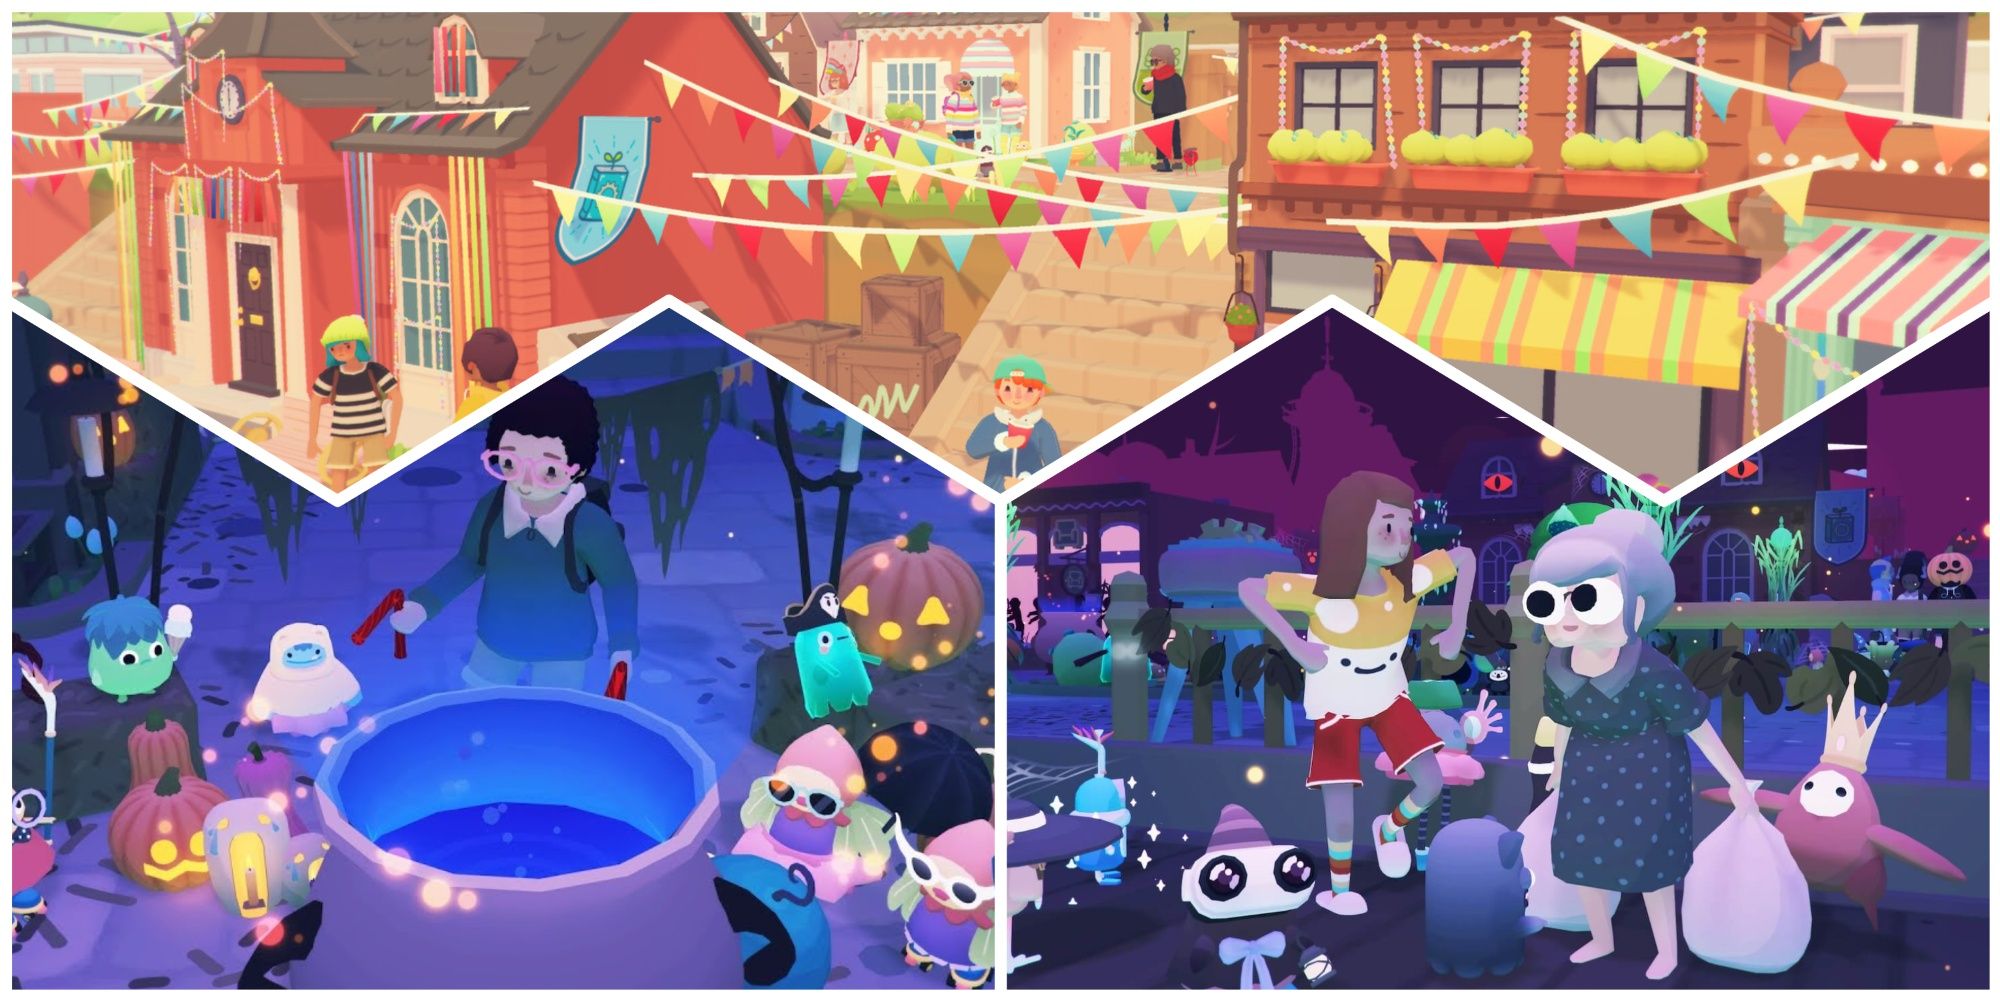 Townsfolk and Ooblets in Ooblets